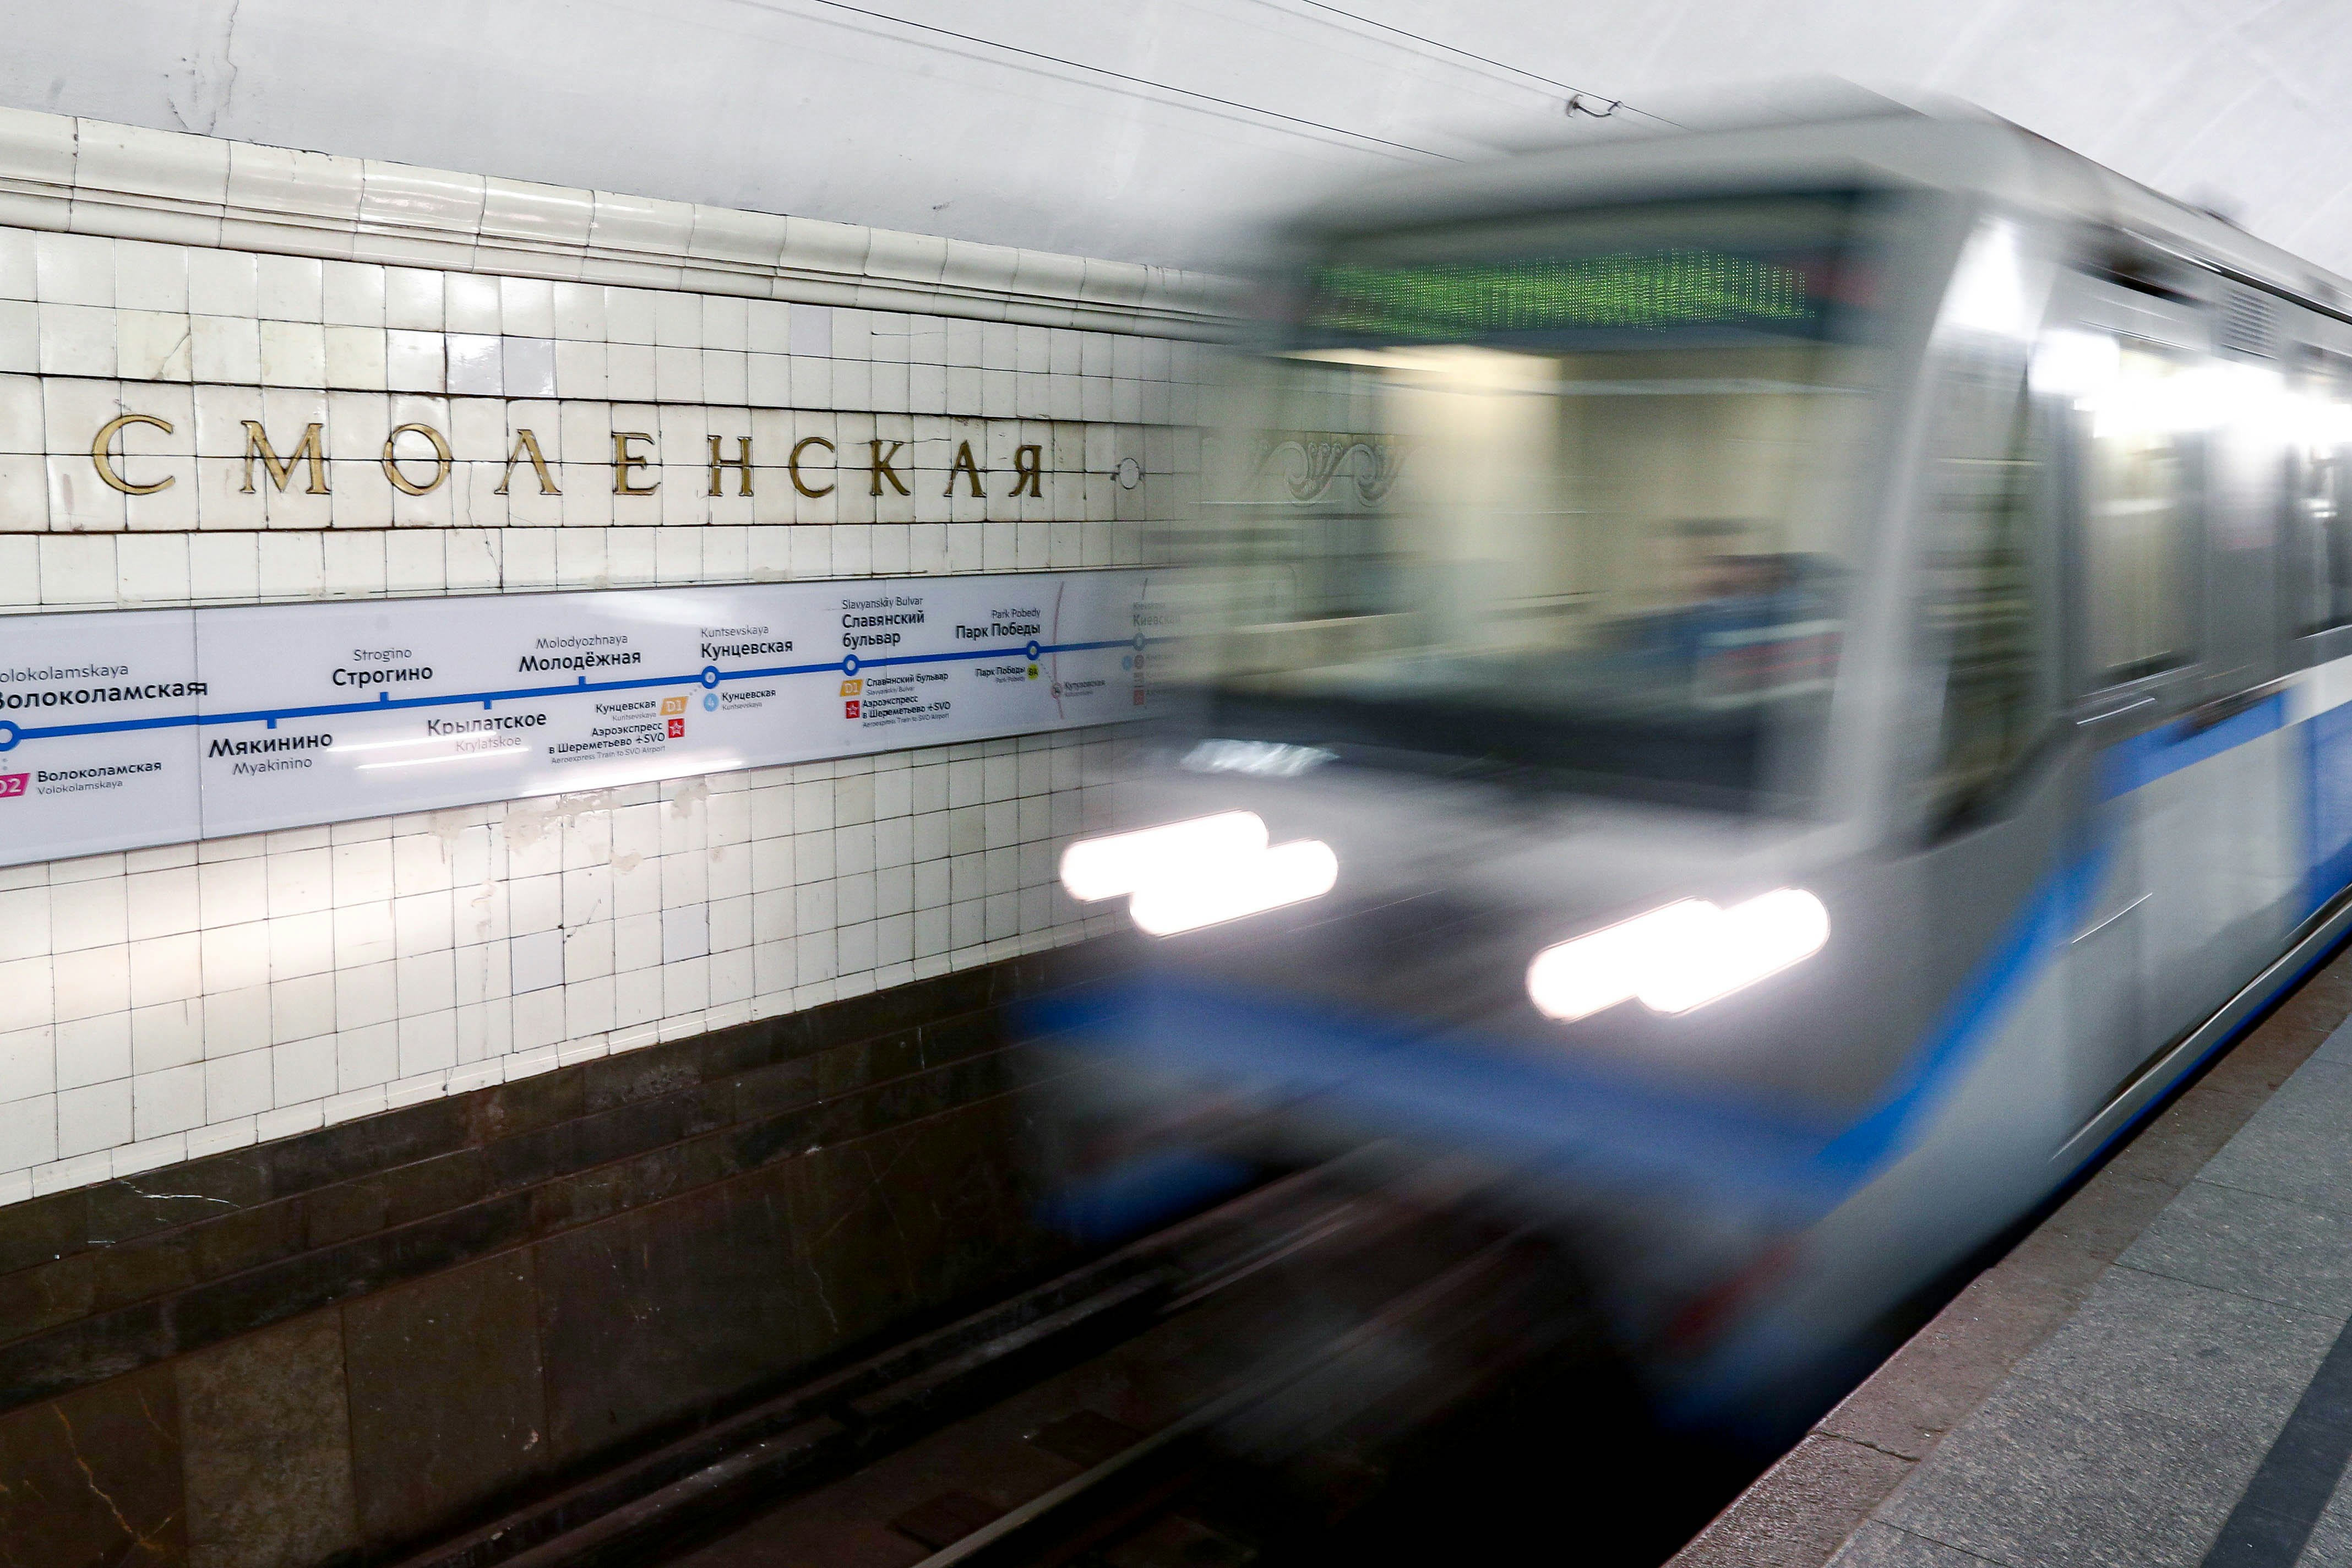 A blurred train travelling at speed through a station with a tiled wall and a station guide.